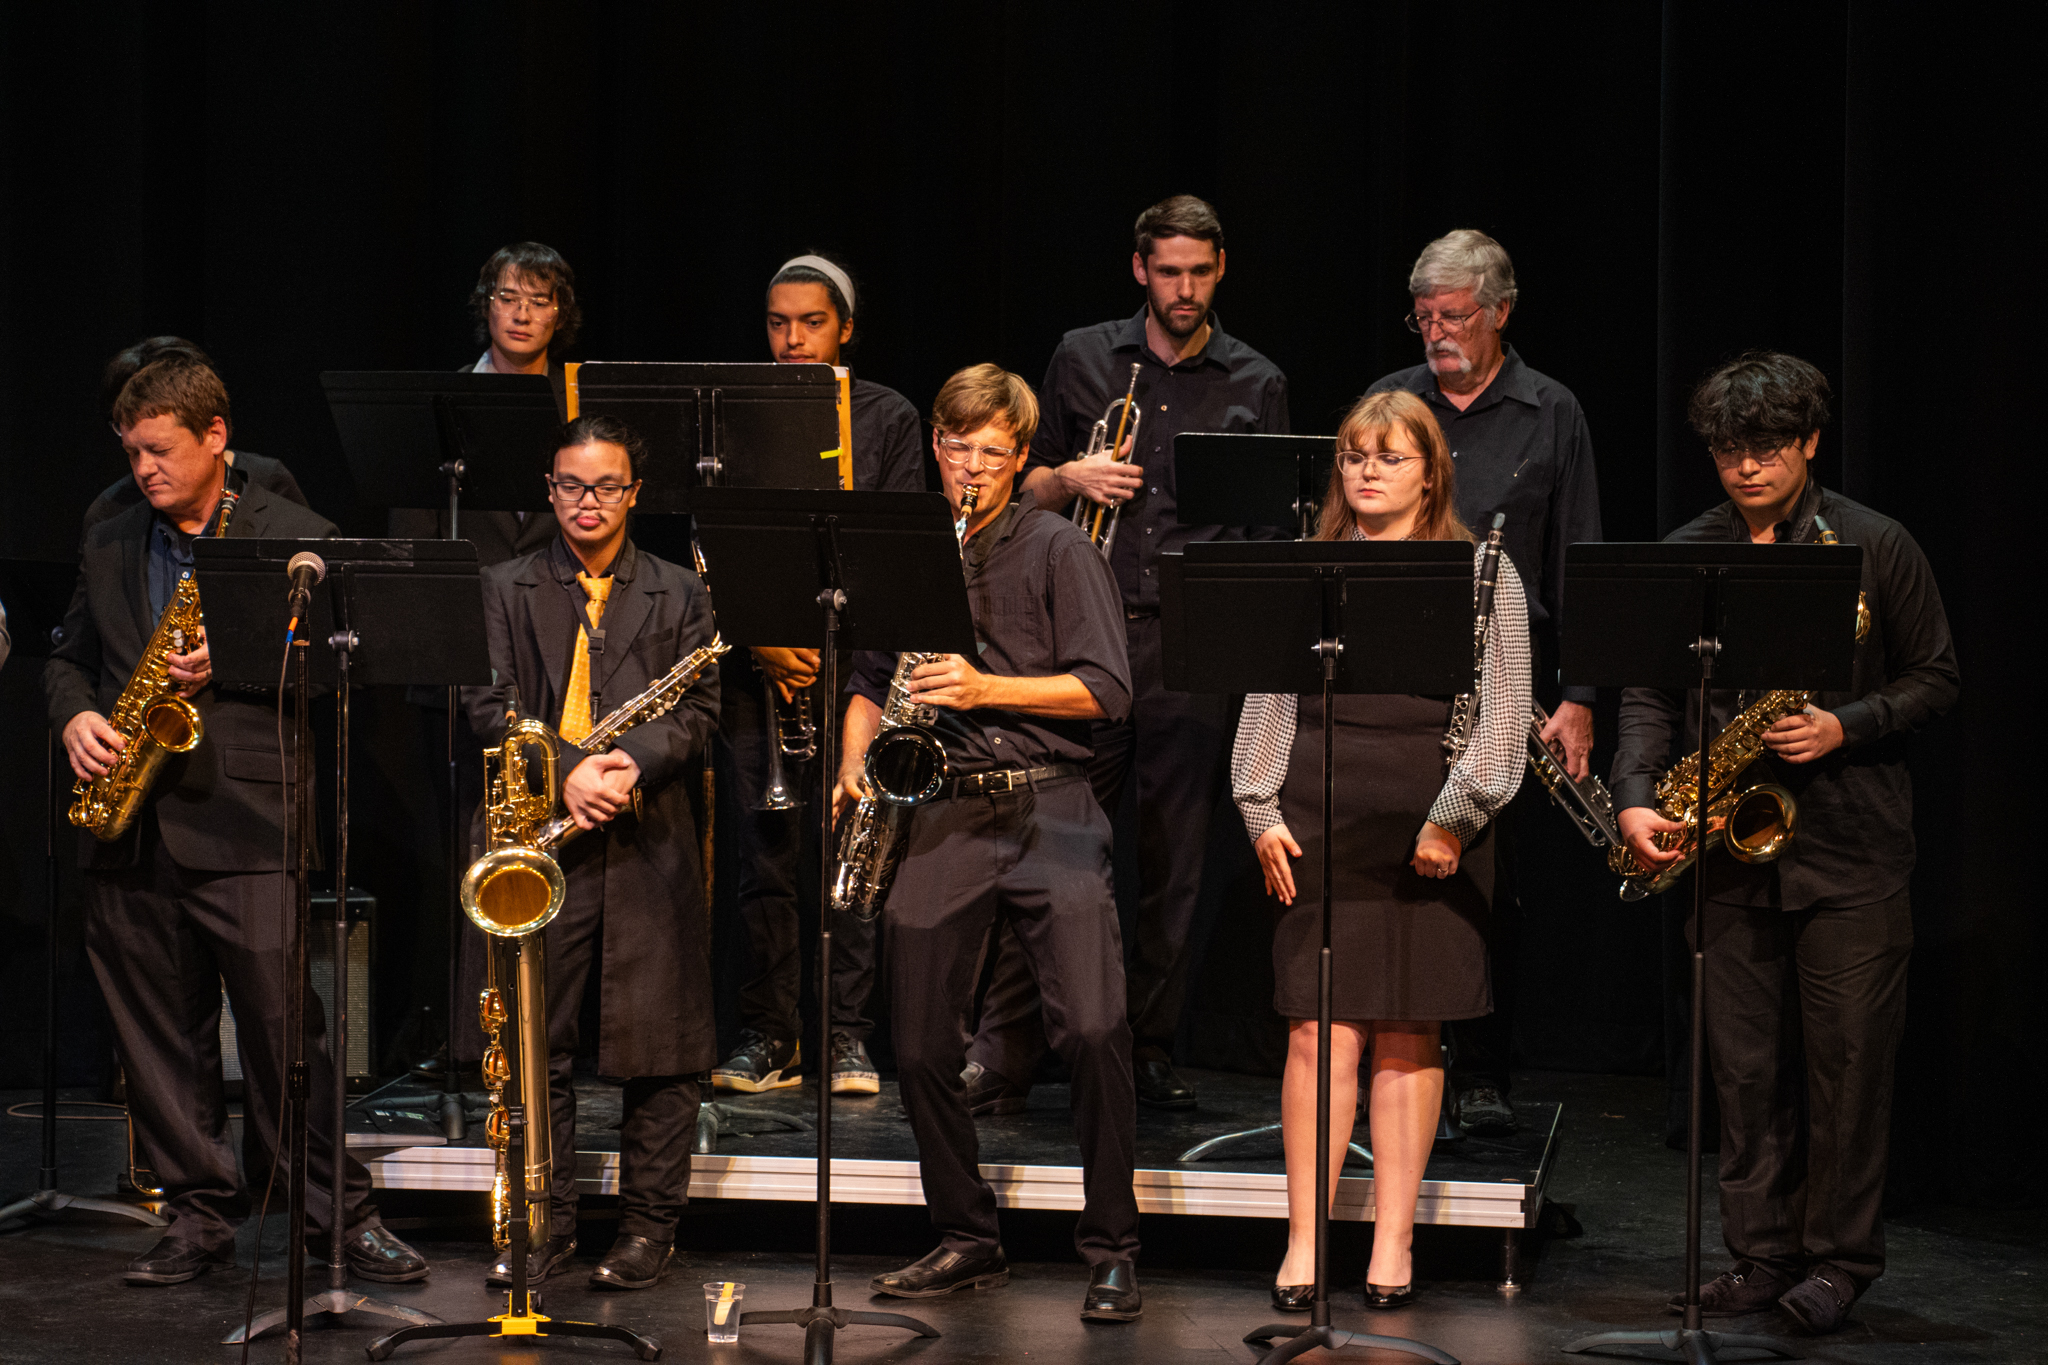 Alex Hoben/The Collegian The SE Jazz Band performs during their concert on Oct. 10. The concert featured not only them but also the Chamber Wind Ensemble and the Music Club.